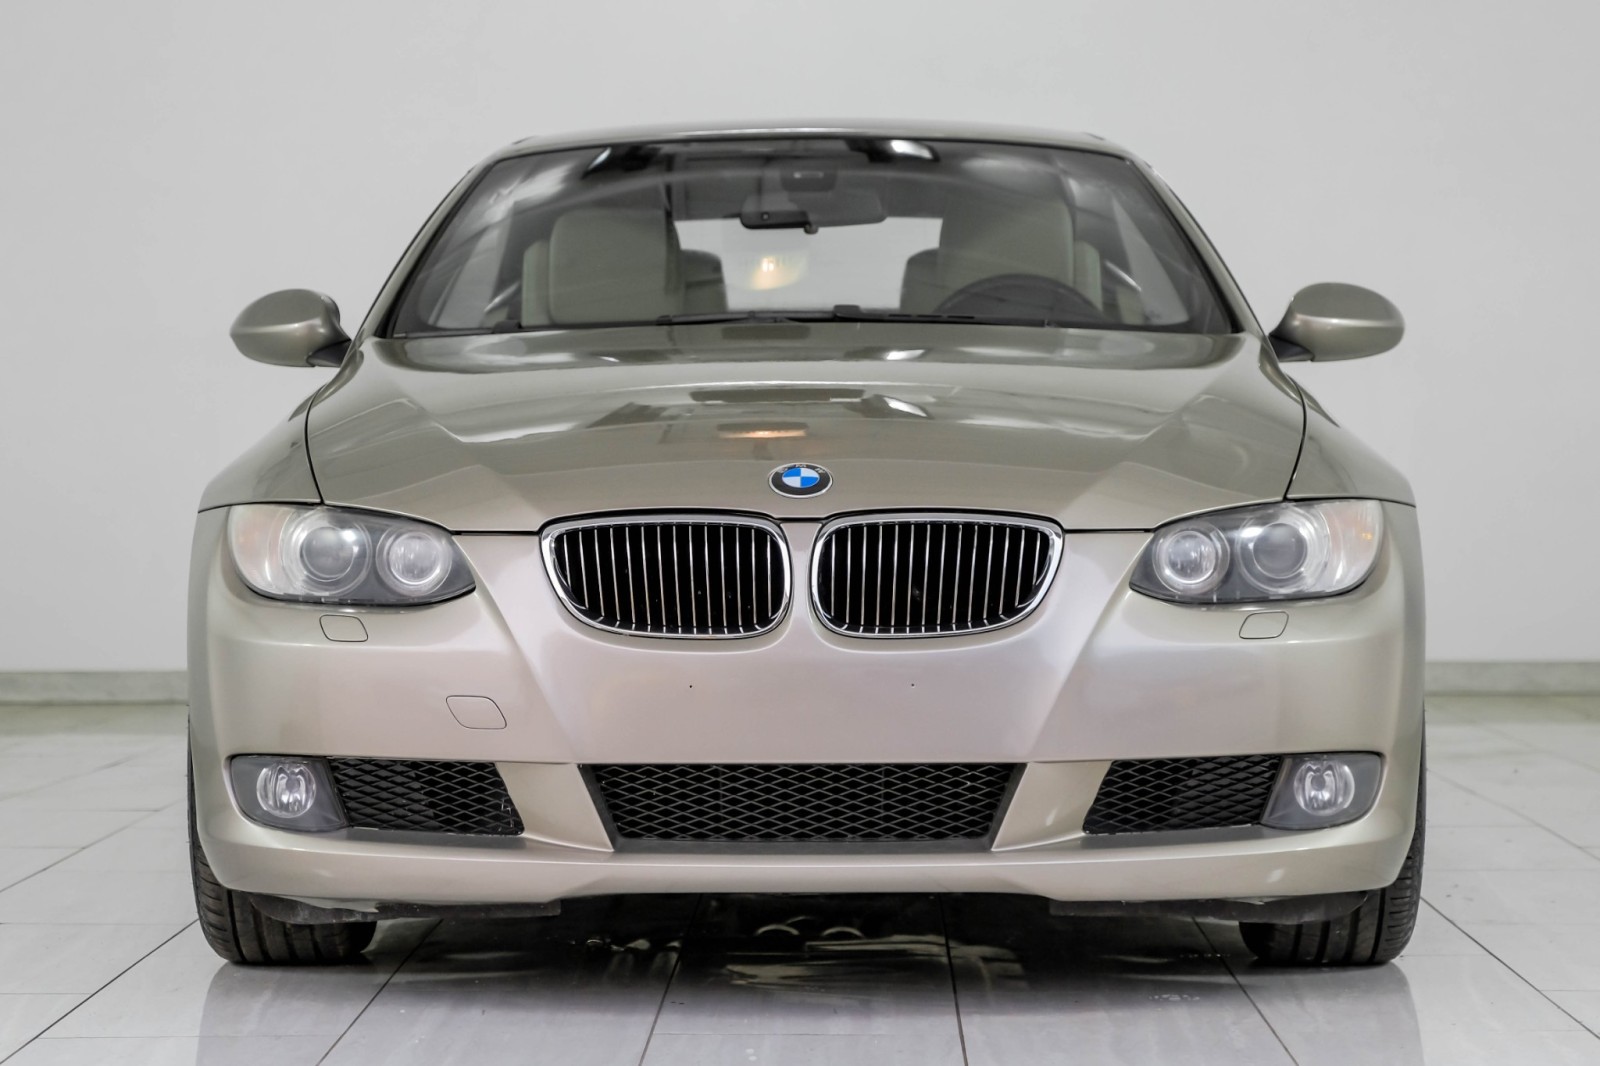 2007 BMW 328i Convertible AUTOMATIC LEATHER HEATED SEATS PUSH BUTTON START D 7